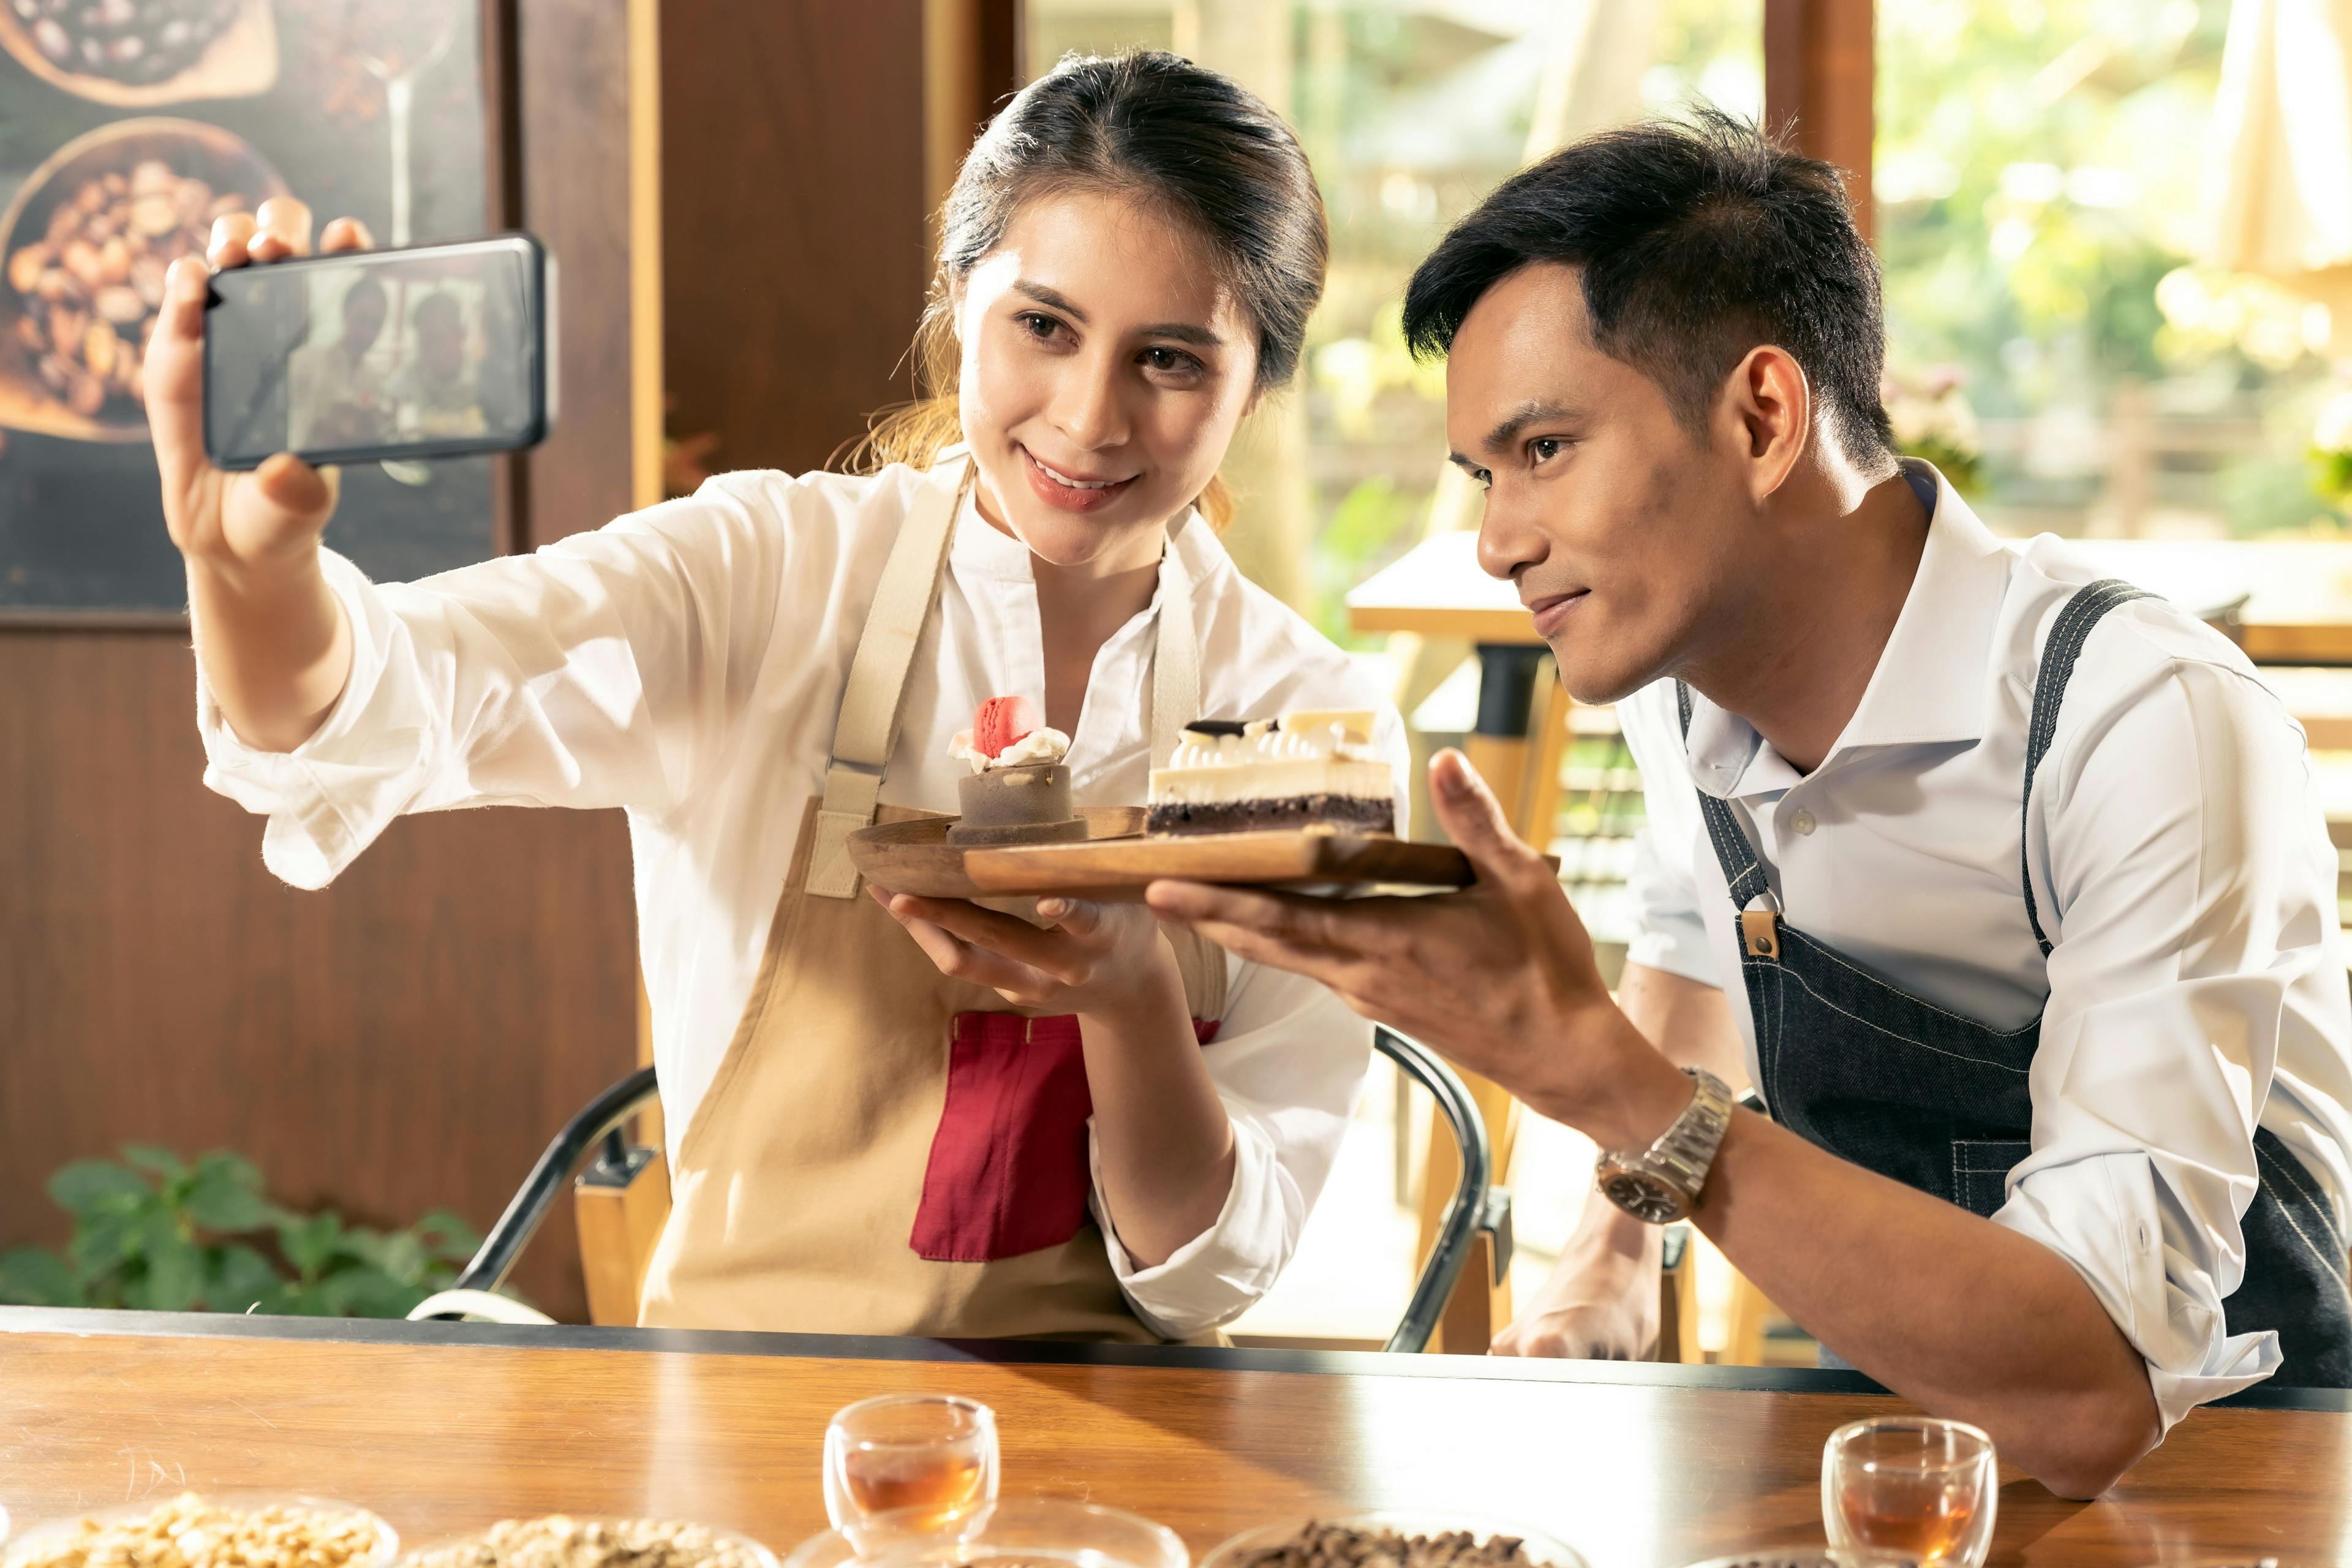 An image of a man and woman photographing a dessert, promoting it through marketing